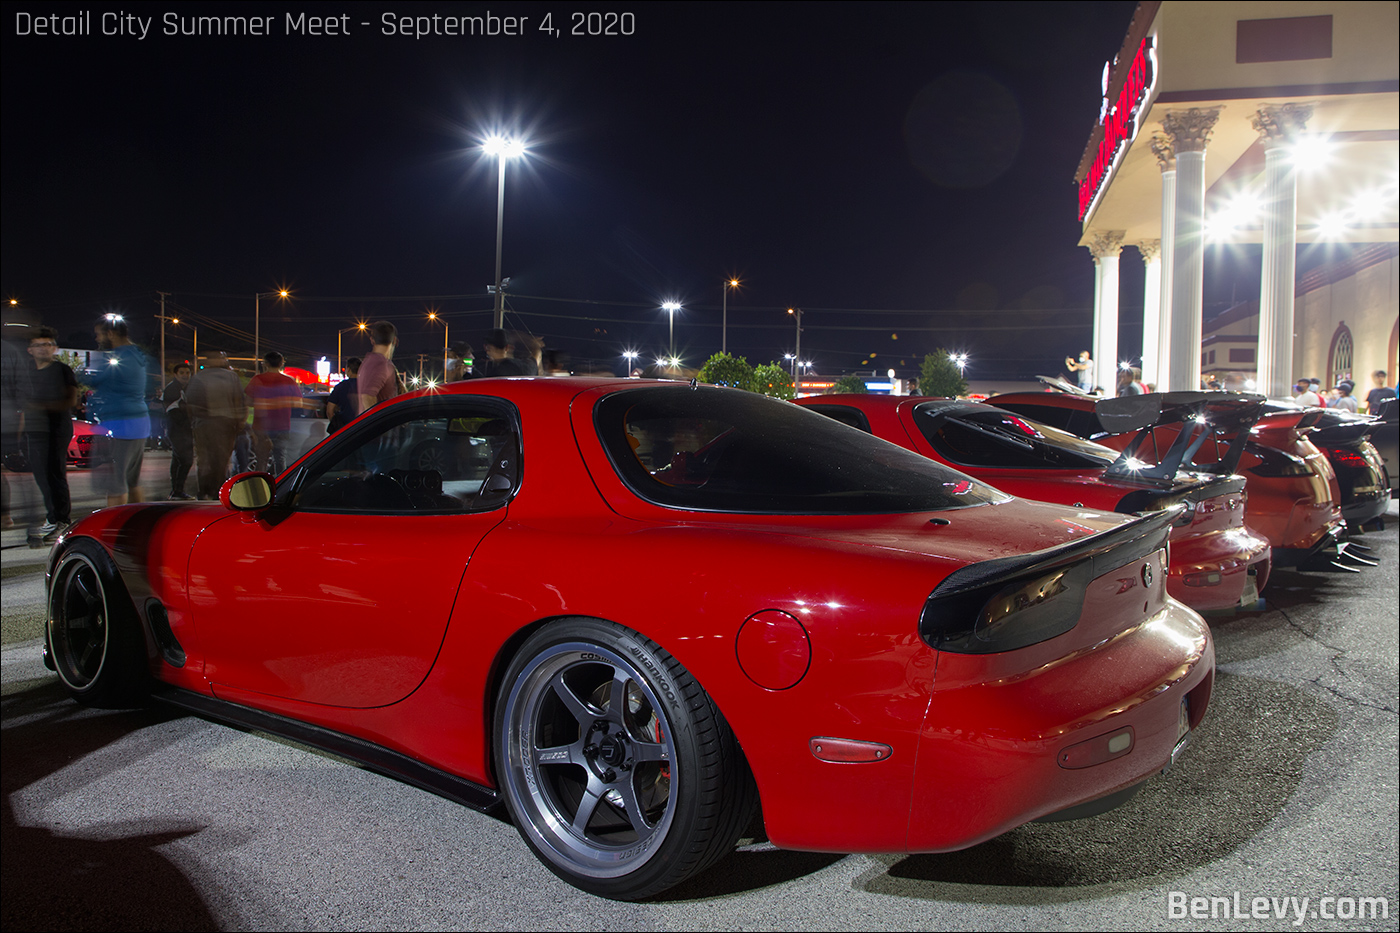 Red RX-7 with Cosmis Racing XT-006R wheels